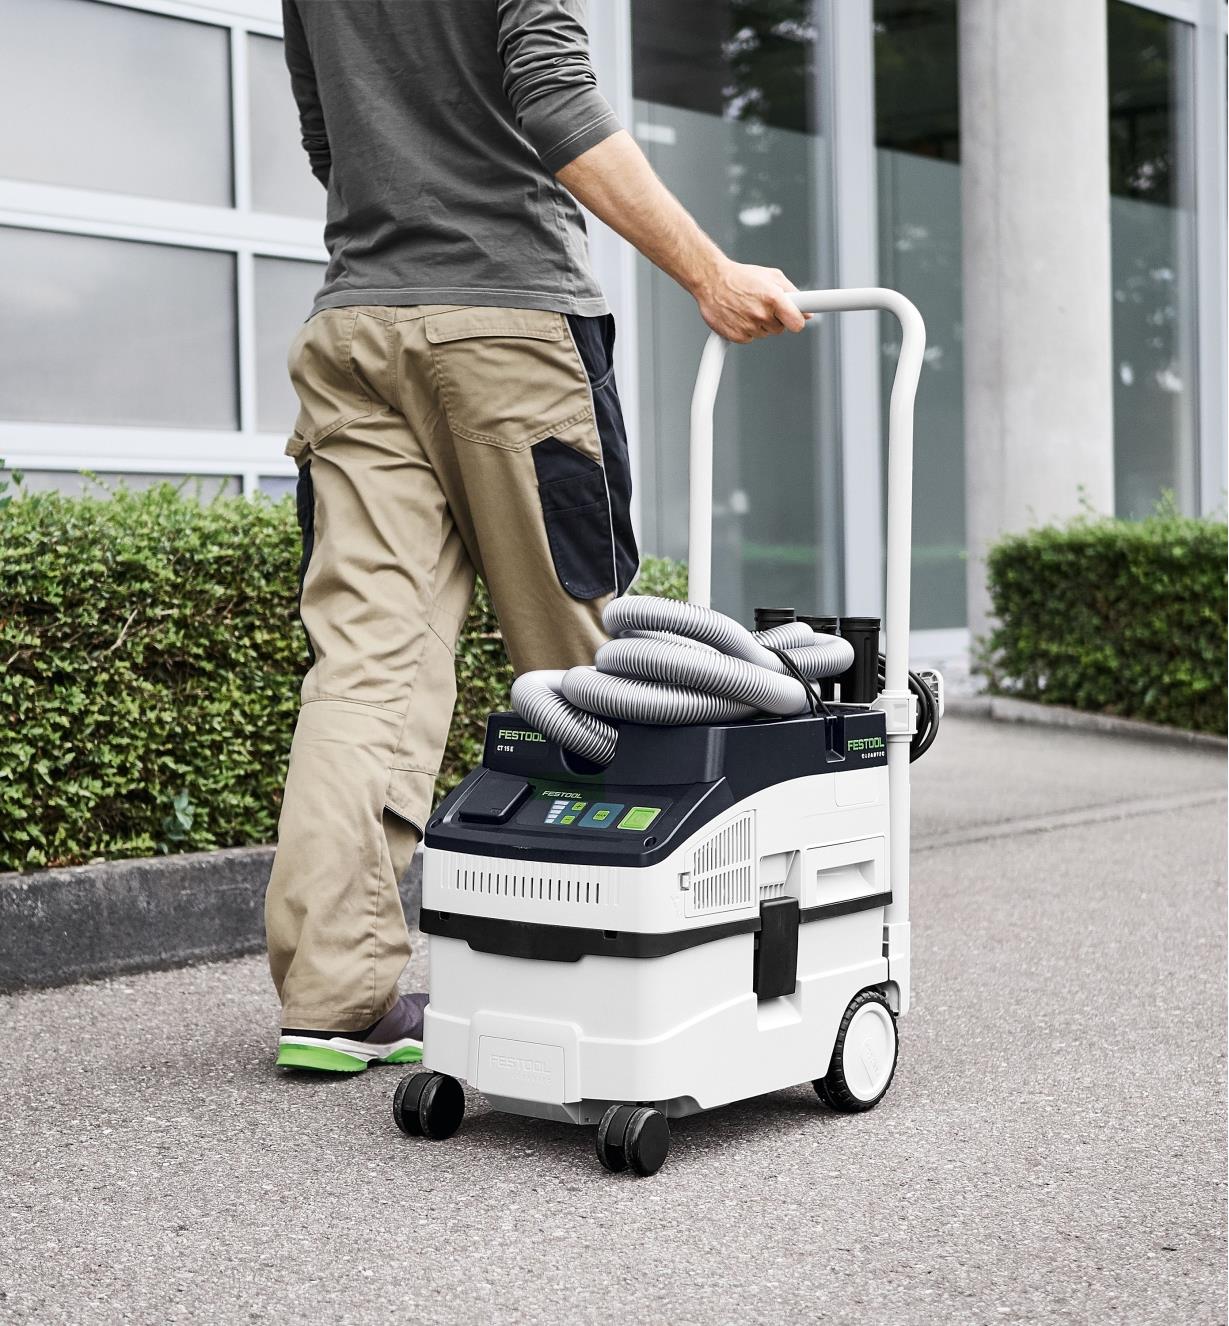 A person pulling a Festool dust extractor using the handle